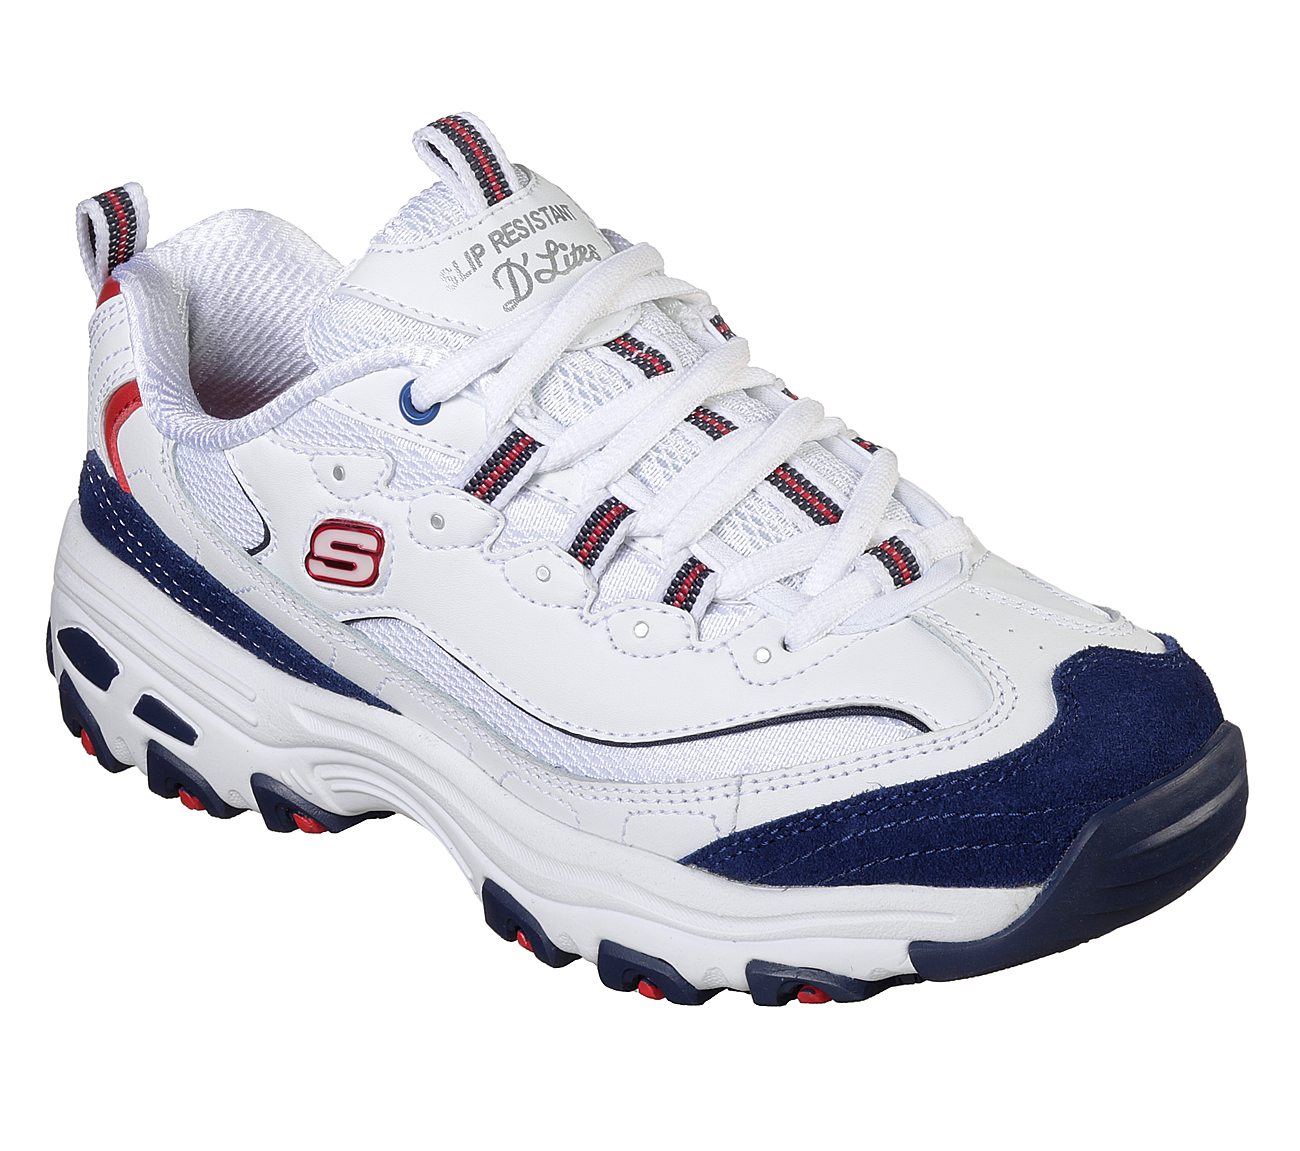 Buy SKECHERS Work Relaxed Fit: D'Lites SR - Health Care Pro Work Shoes ...